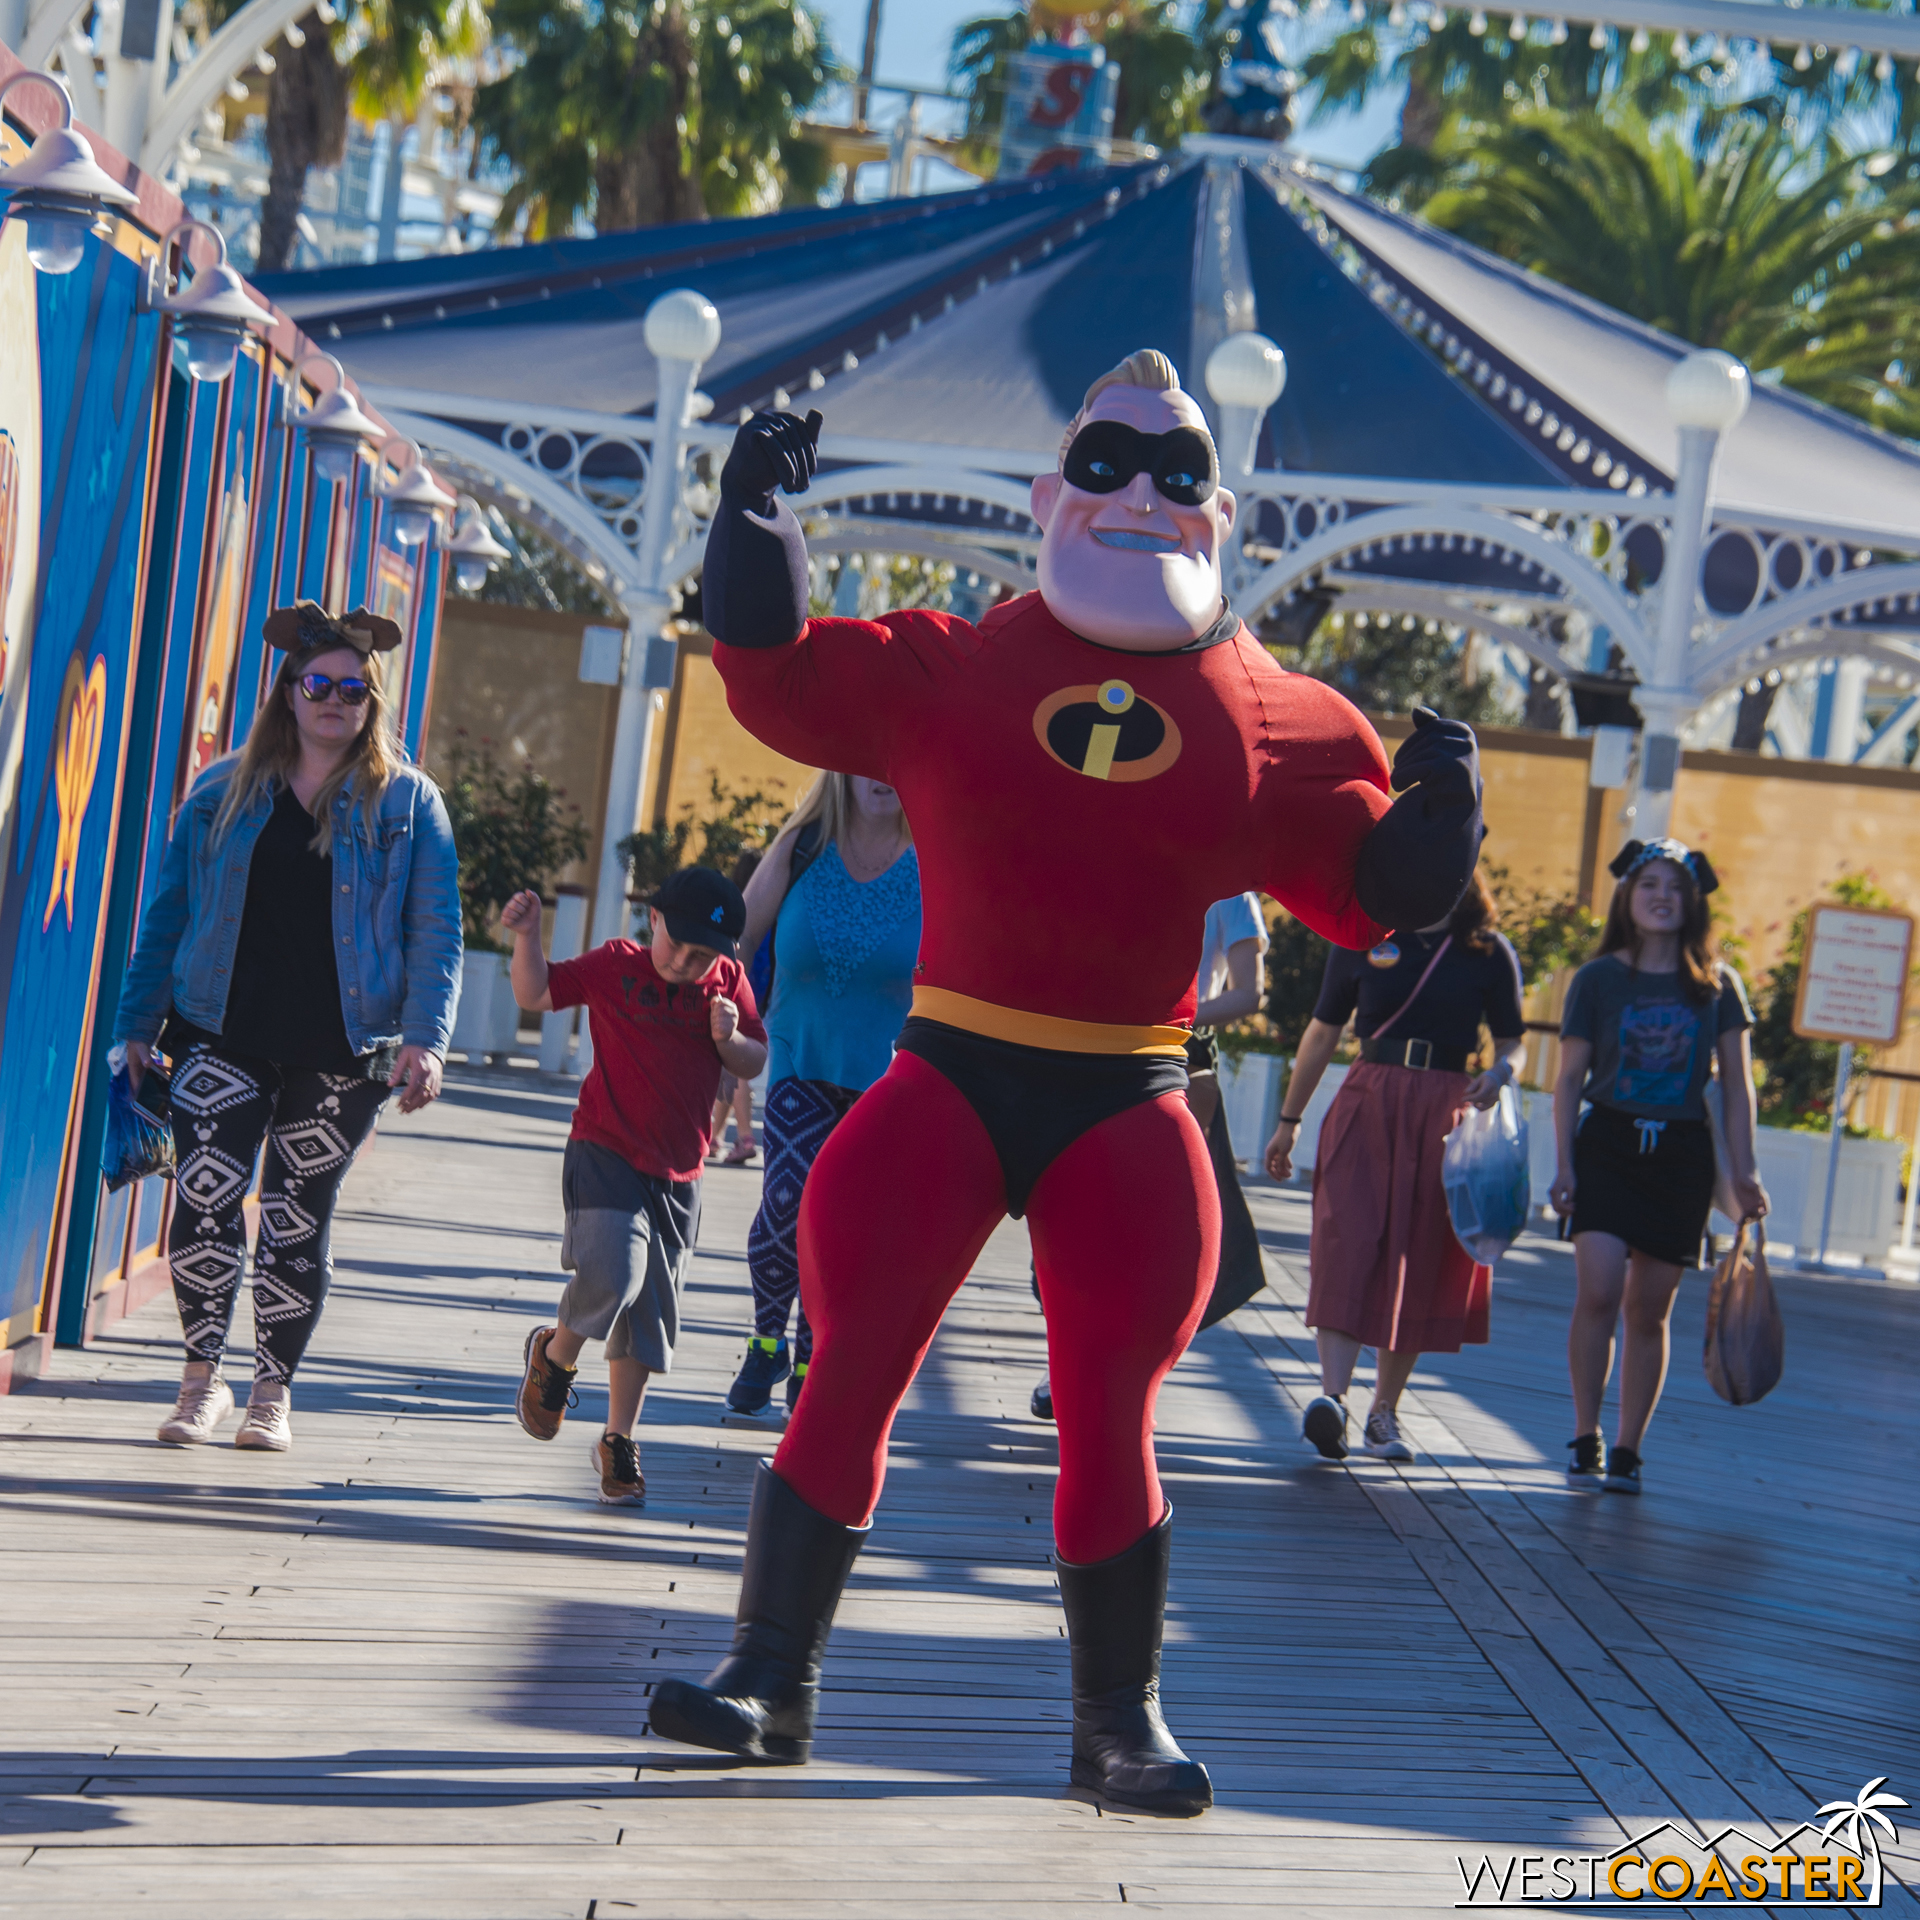  Perhaps he appreciates the synergy, since he'll be in a new movie this summer that opens right as Pixar Pier debuts. 